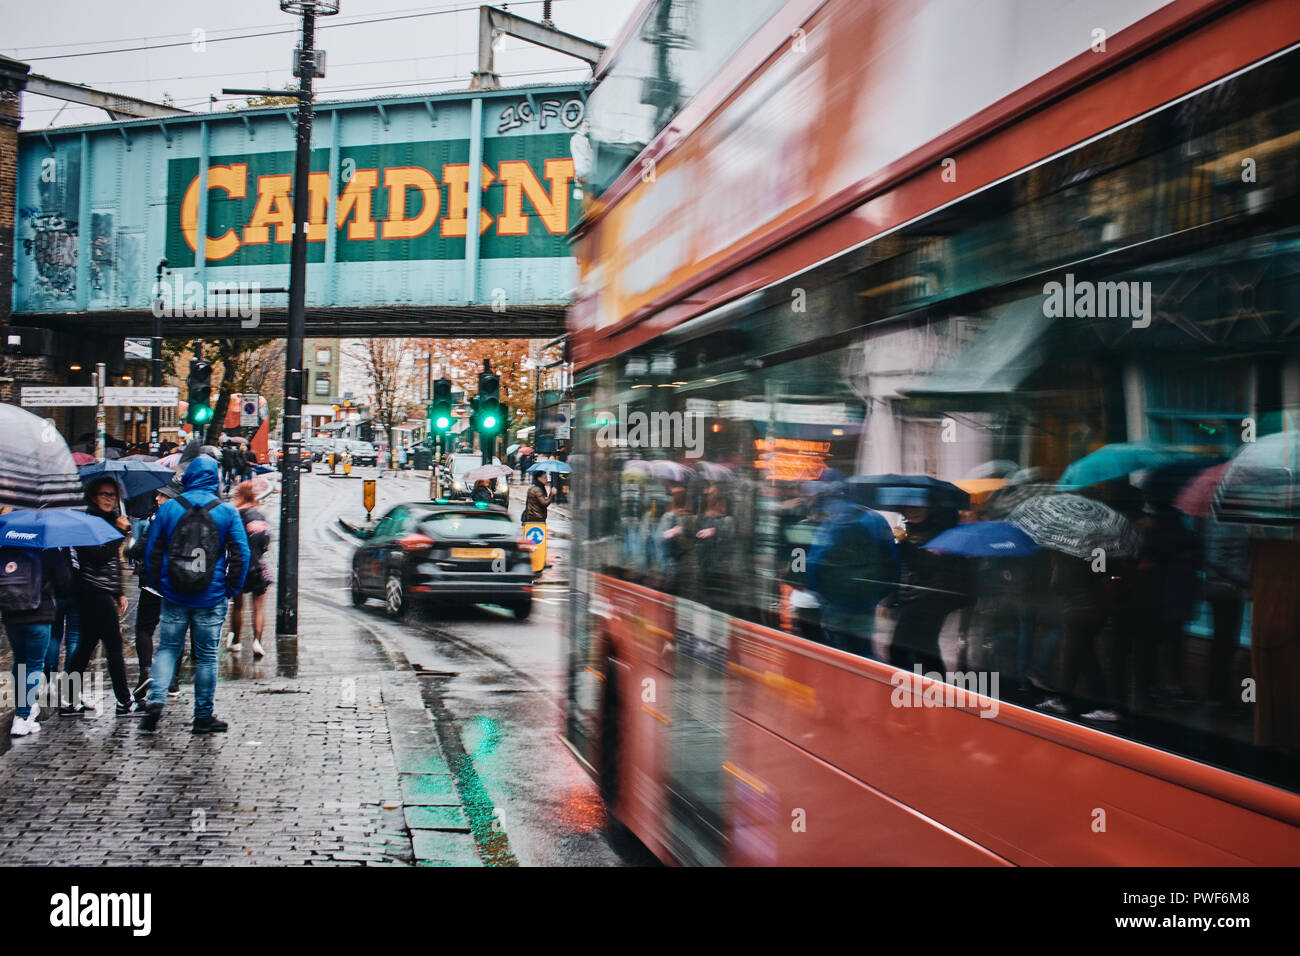 London double decker bus as seen at Camden Market as seen in  Camden Town, London UK. Photo by Gergo Toth / Alamy Live News Stock Photo